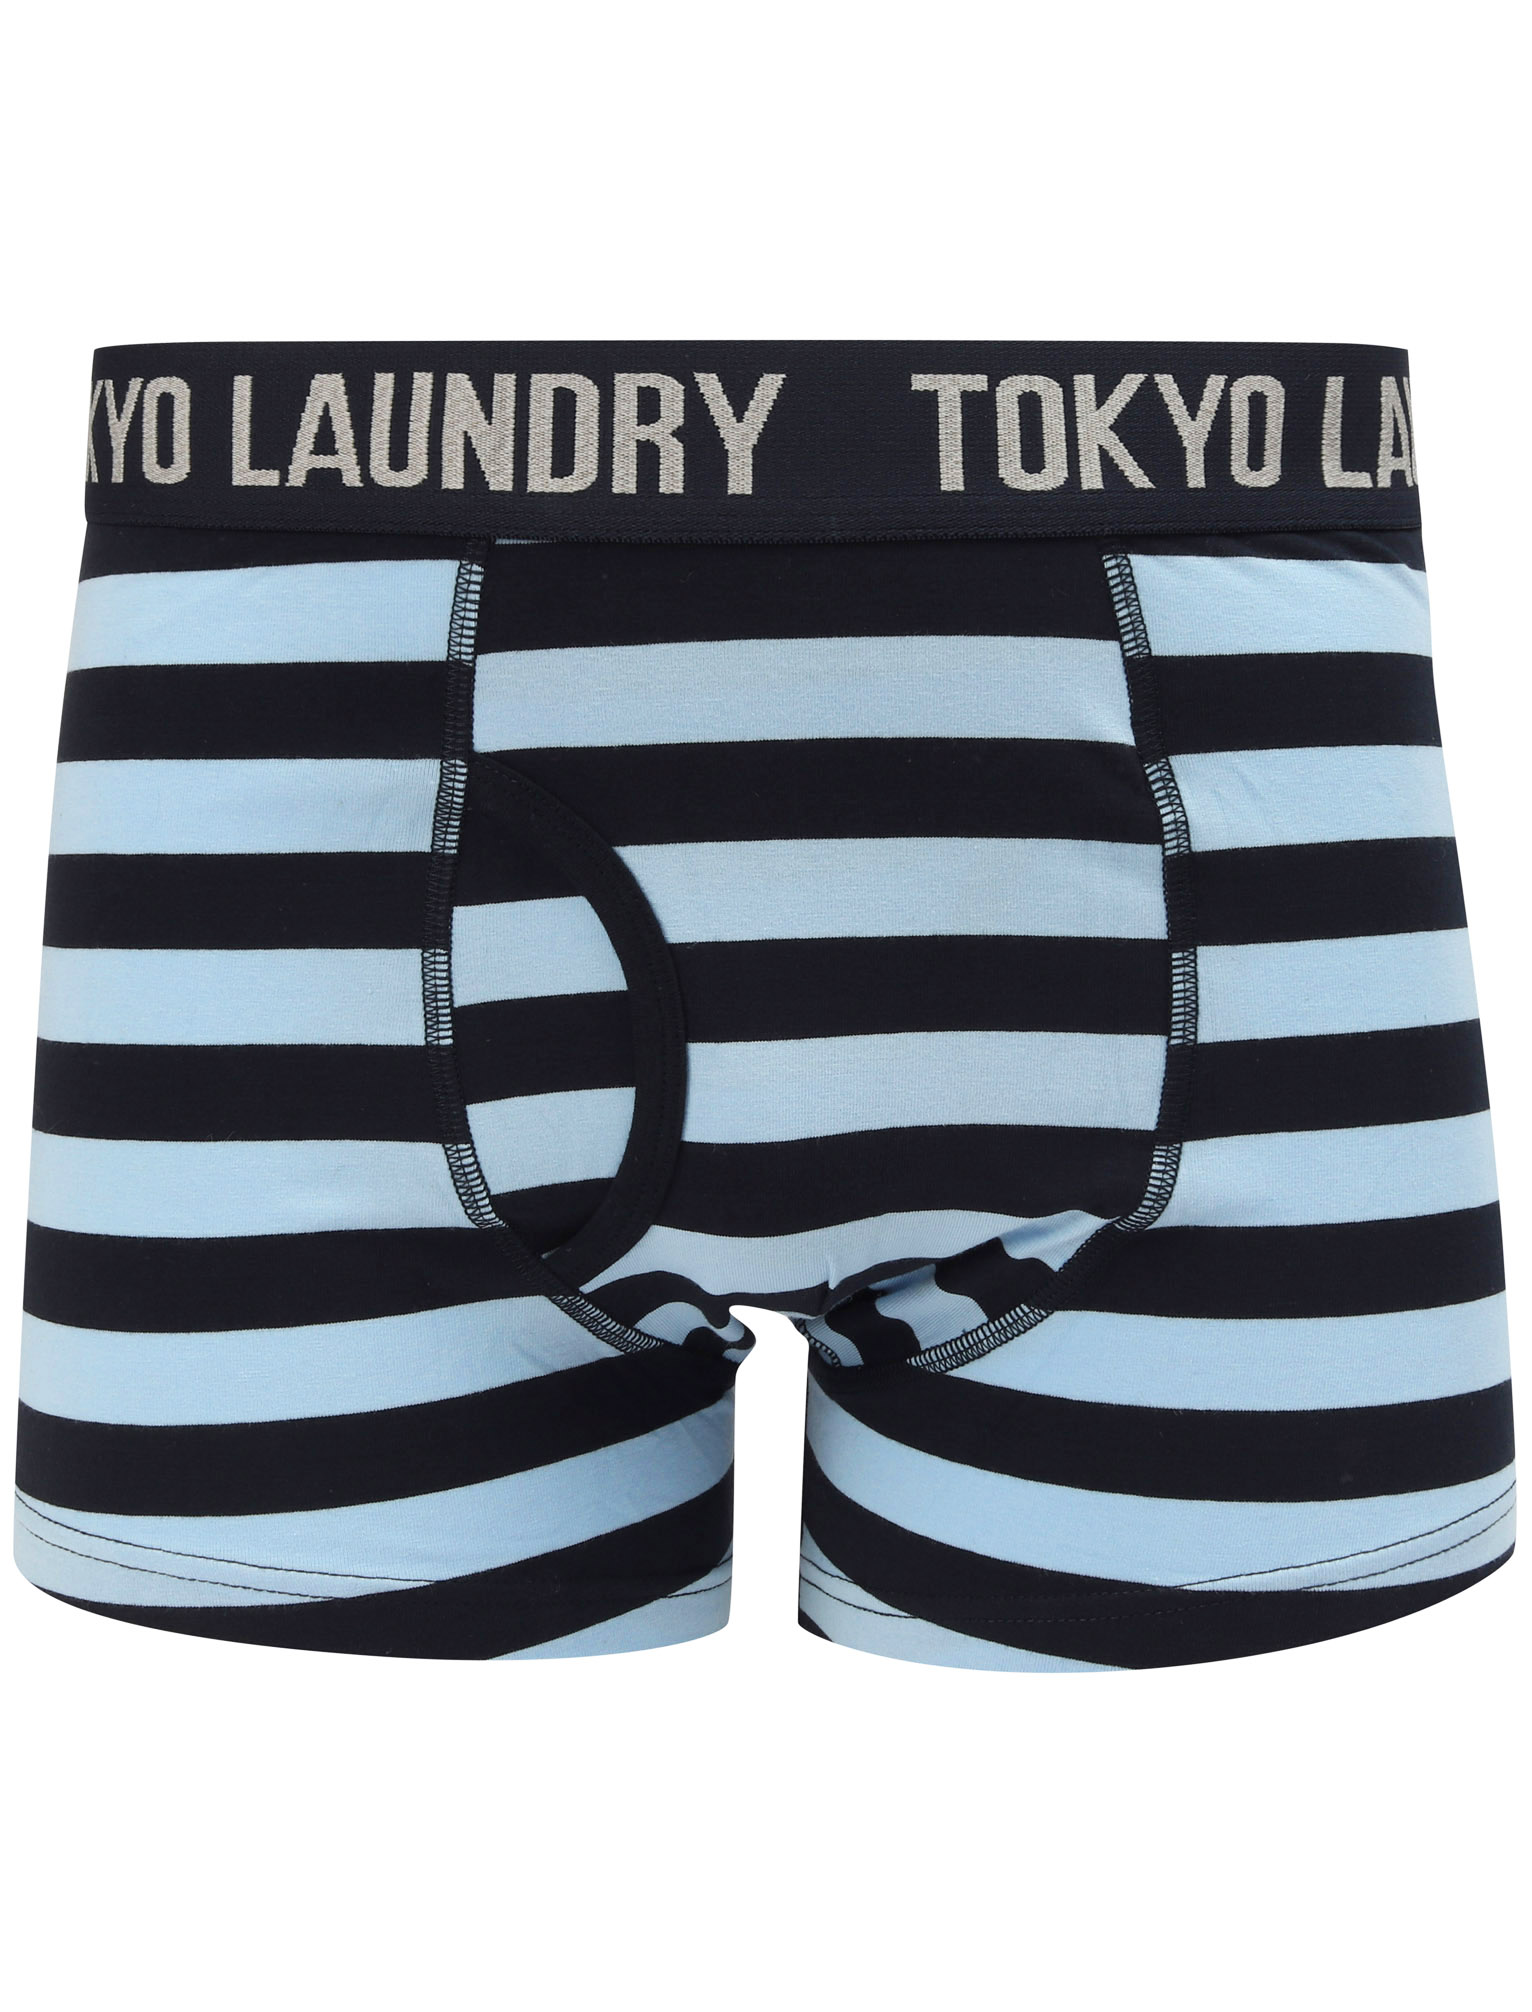 New Mens Tokyo Laundry (2 Pack) Cotton Striped Boxer Shorts Trunks Size  